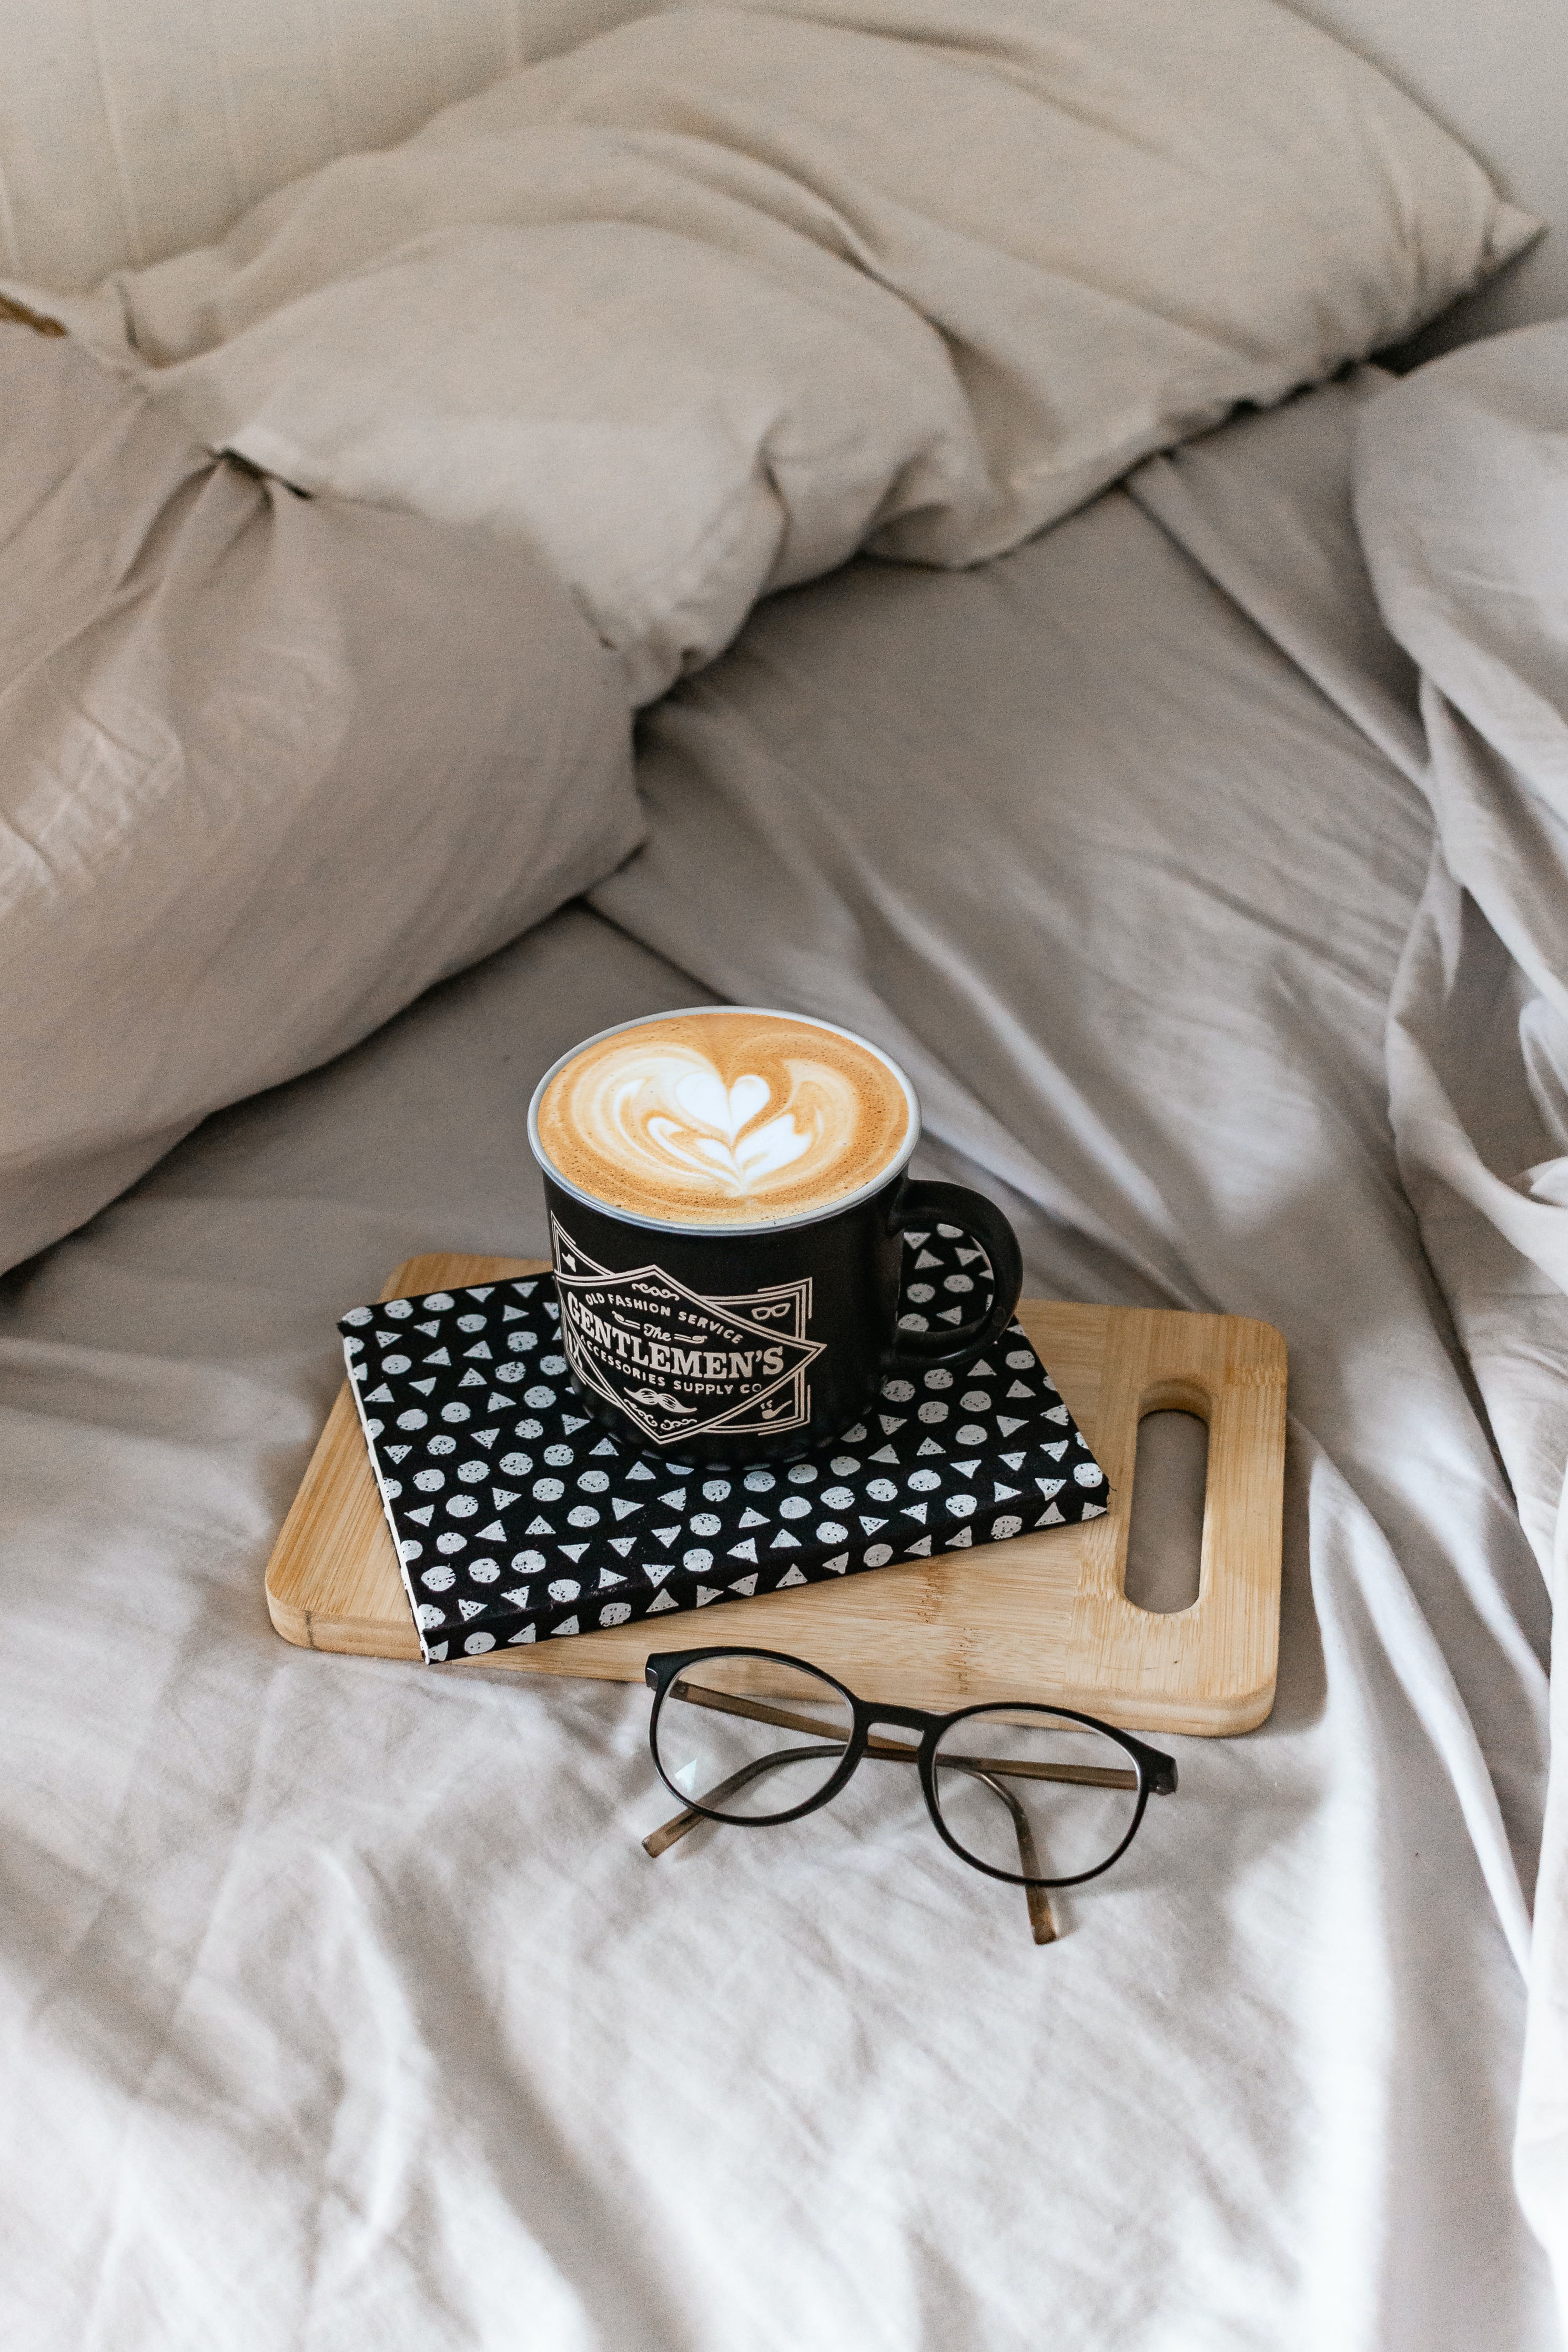 miscellanea, spectacles, cappuccino, miscellaneous, cup, book, bed, glasses